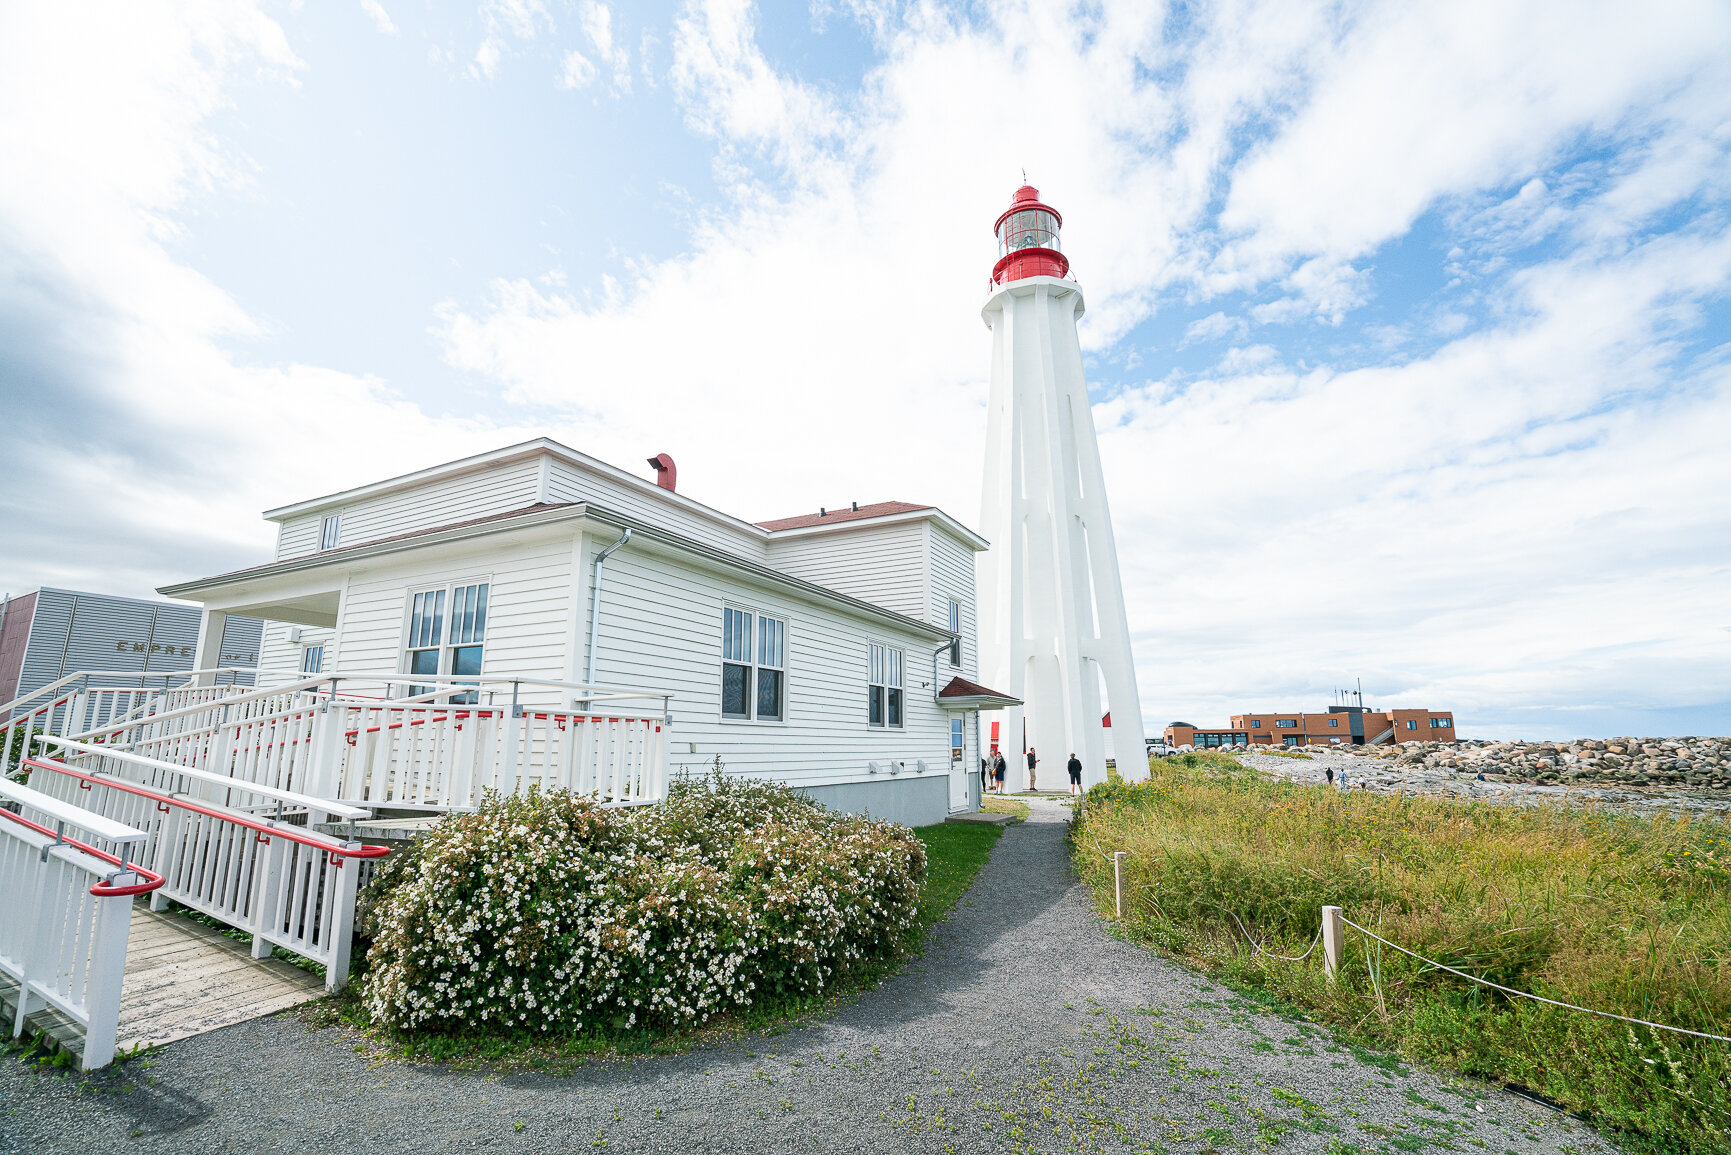 Park Canada Lighthouse in Rimouski, Quebec